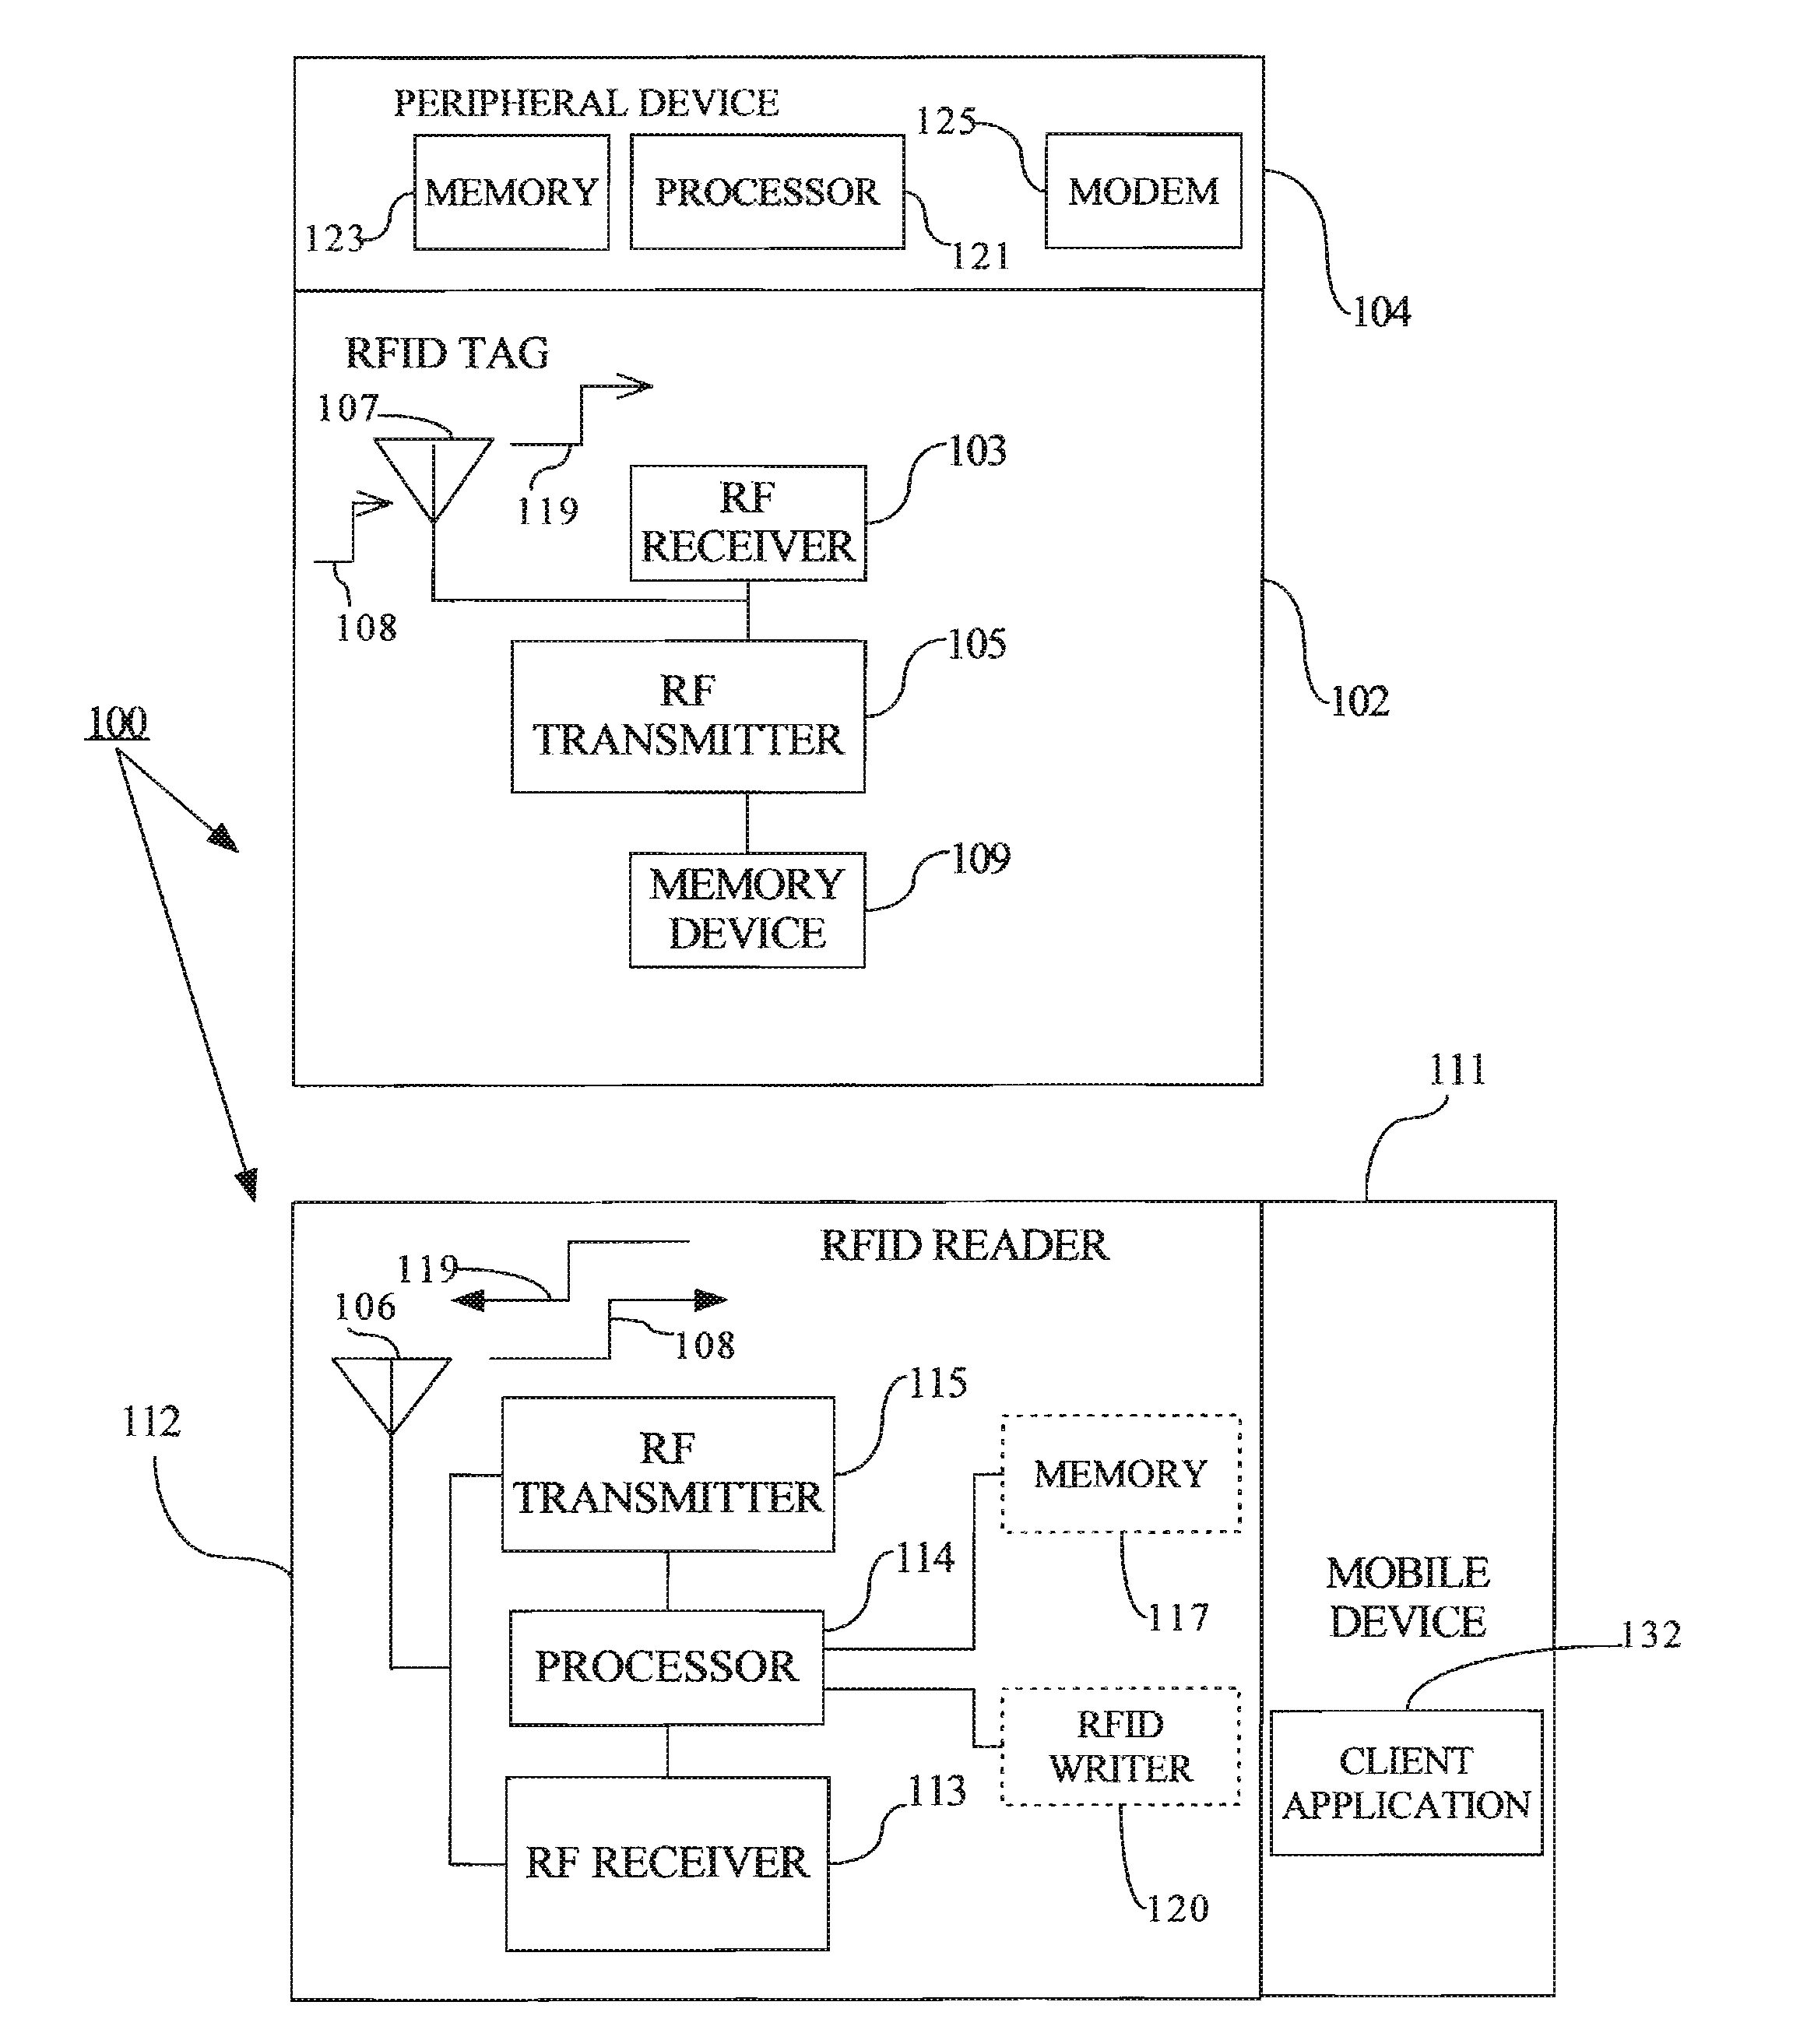 Utilizing radio frequency identification tags to display messages and notifications on peripheral devices